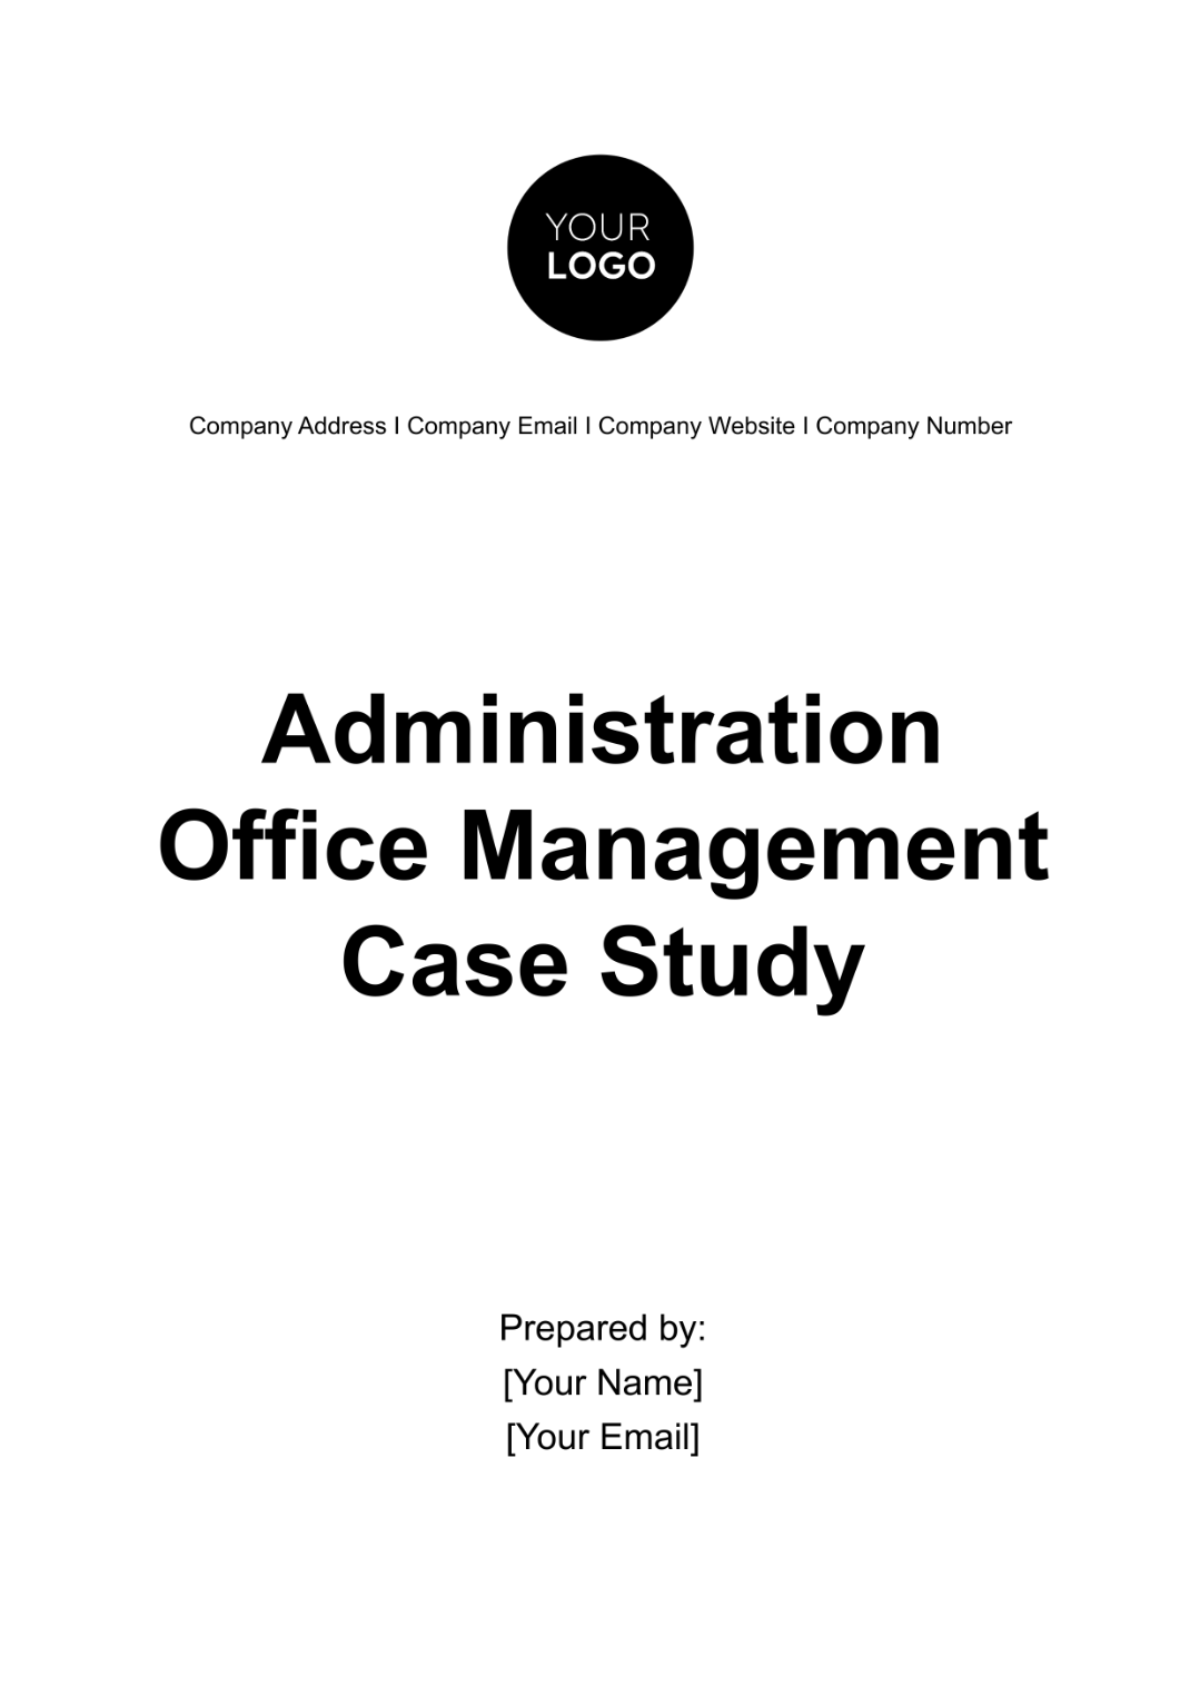 Administration Office Management Case Study Template